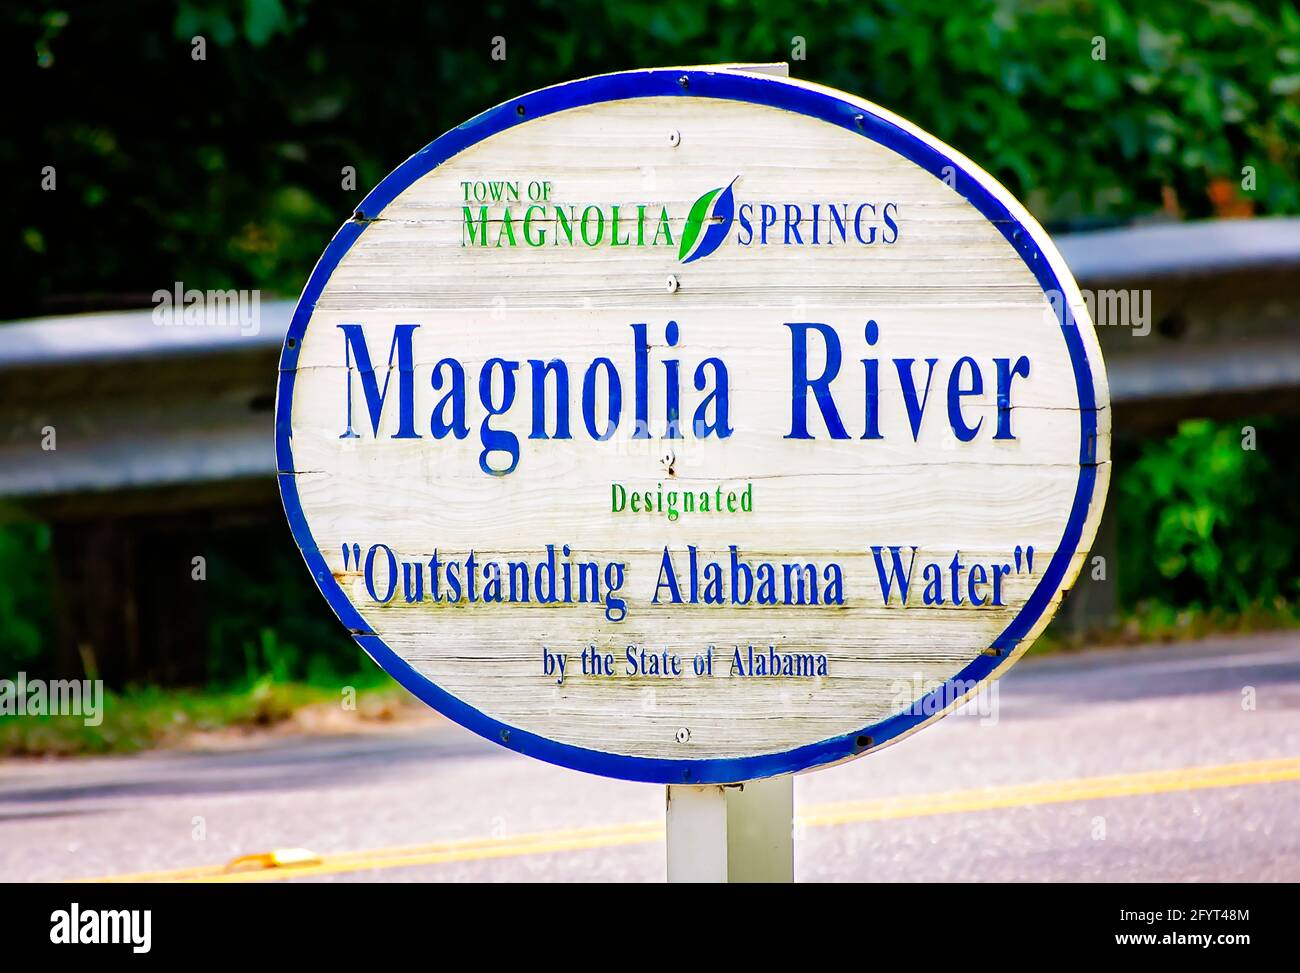 A sign lists the Magnolia River as “Outstanding Alabama Water,” May 27, 2021, in Magnolia Springs, Alabama. Stock Photo